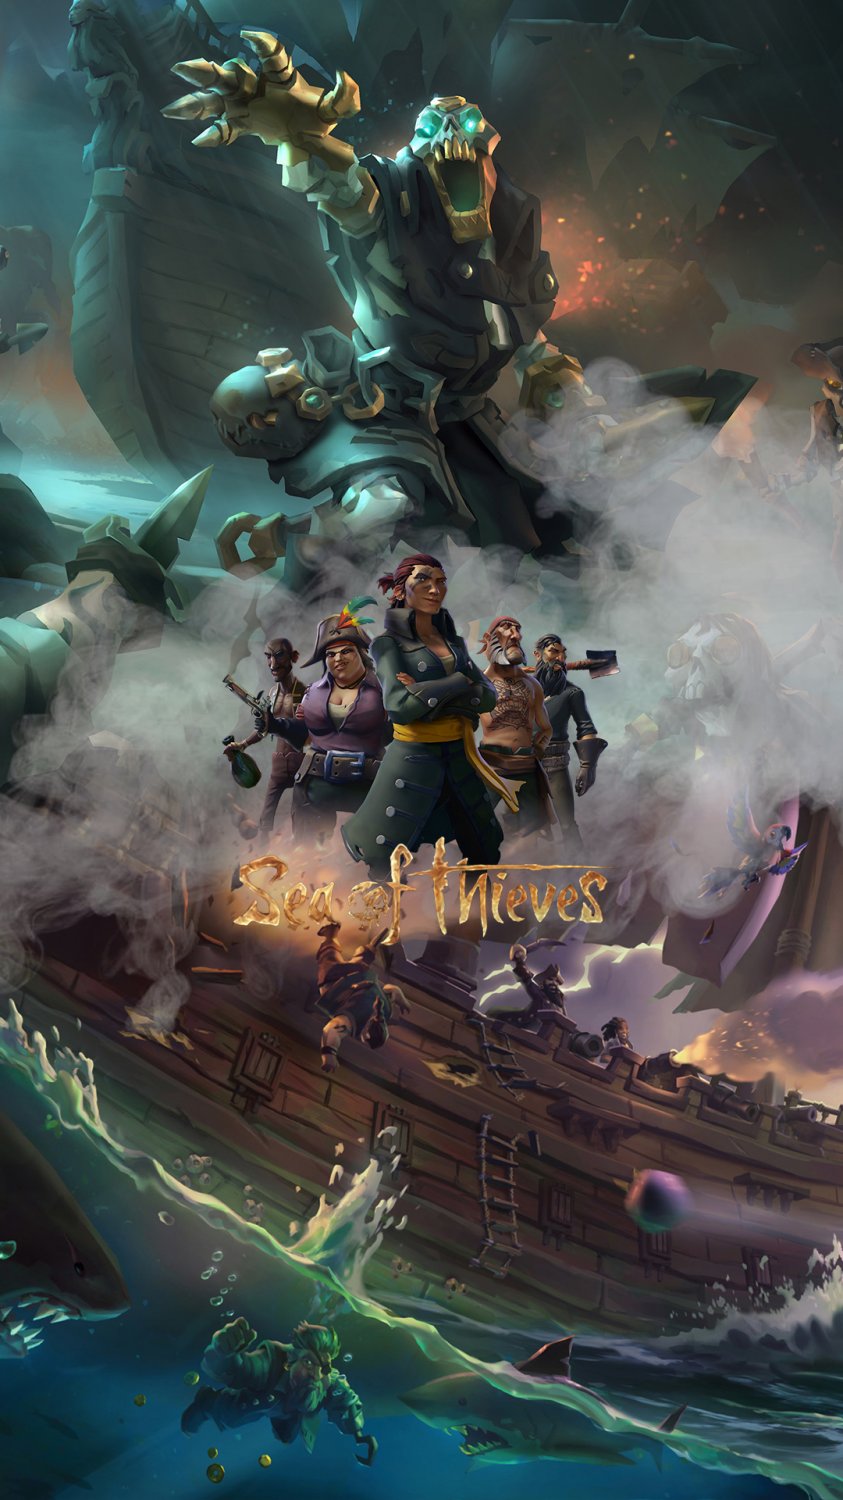 Sea of Thieves Game 13"x19" (32cm/49cm) Polyester Fabric Poster